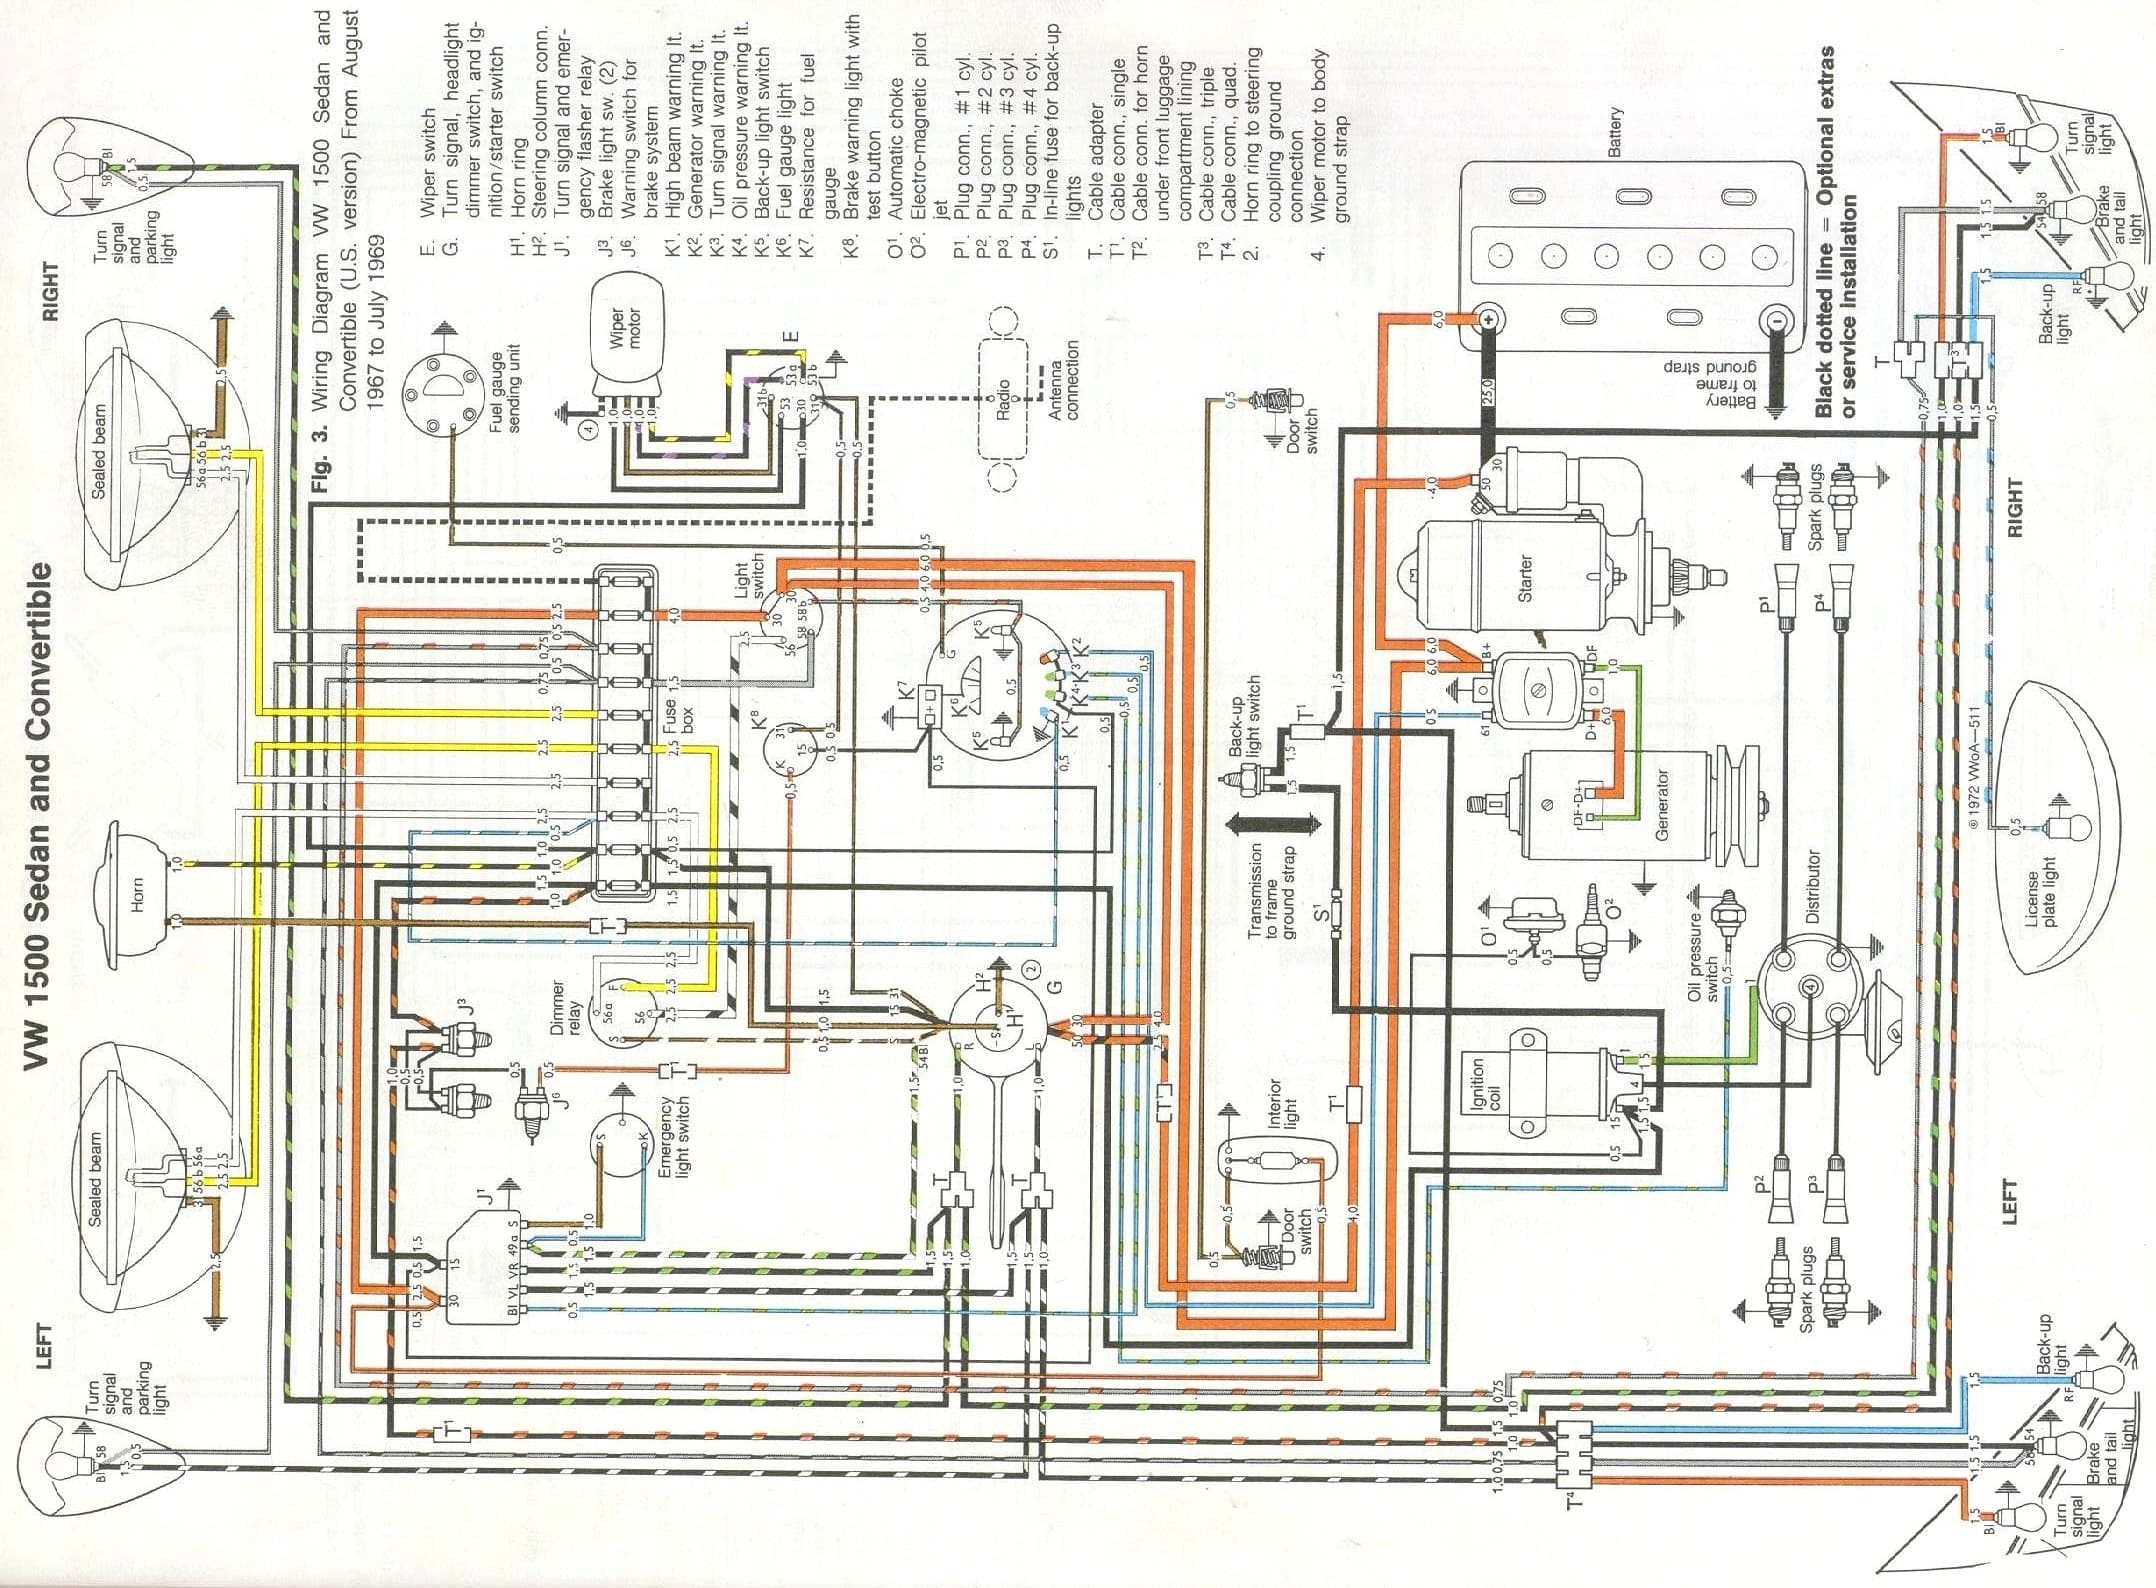 Wiring Diagram image for a 1500 Volkswagen  Sedan and Convertible (U.S. version) - August 1967 to July 1969